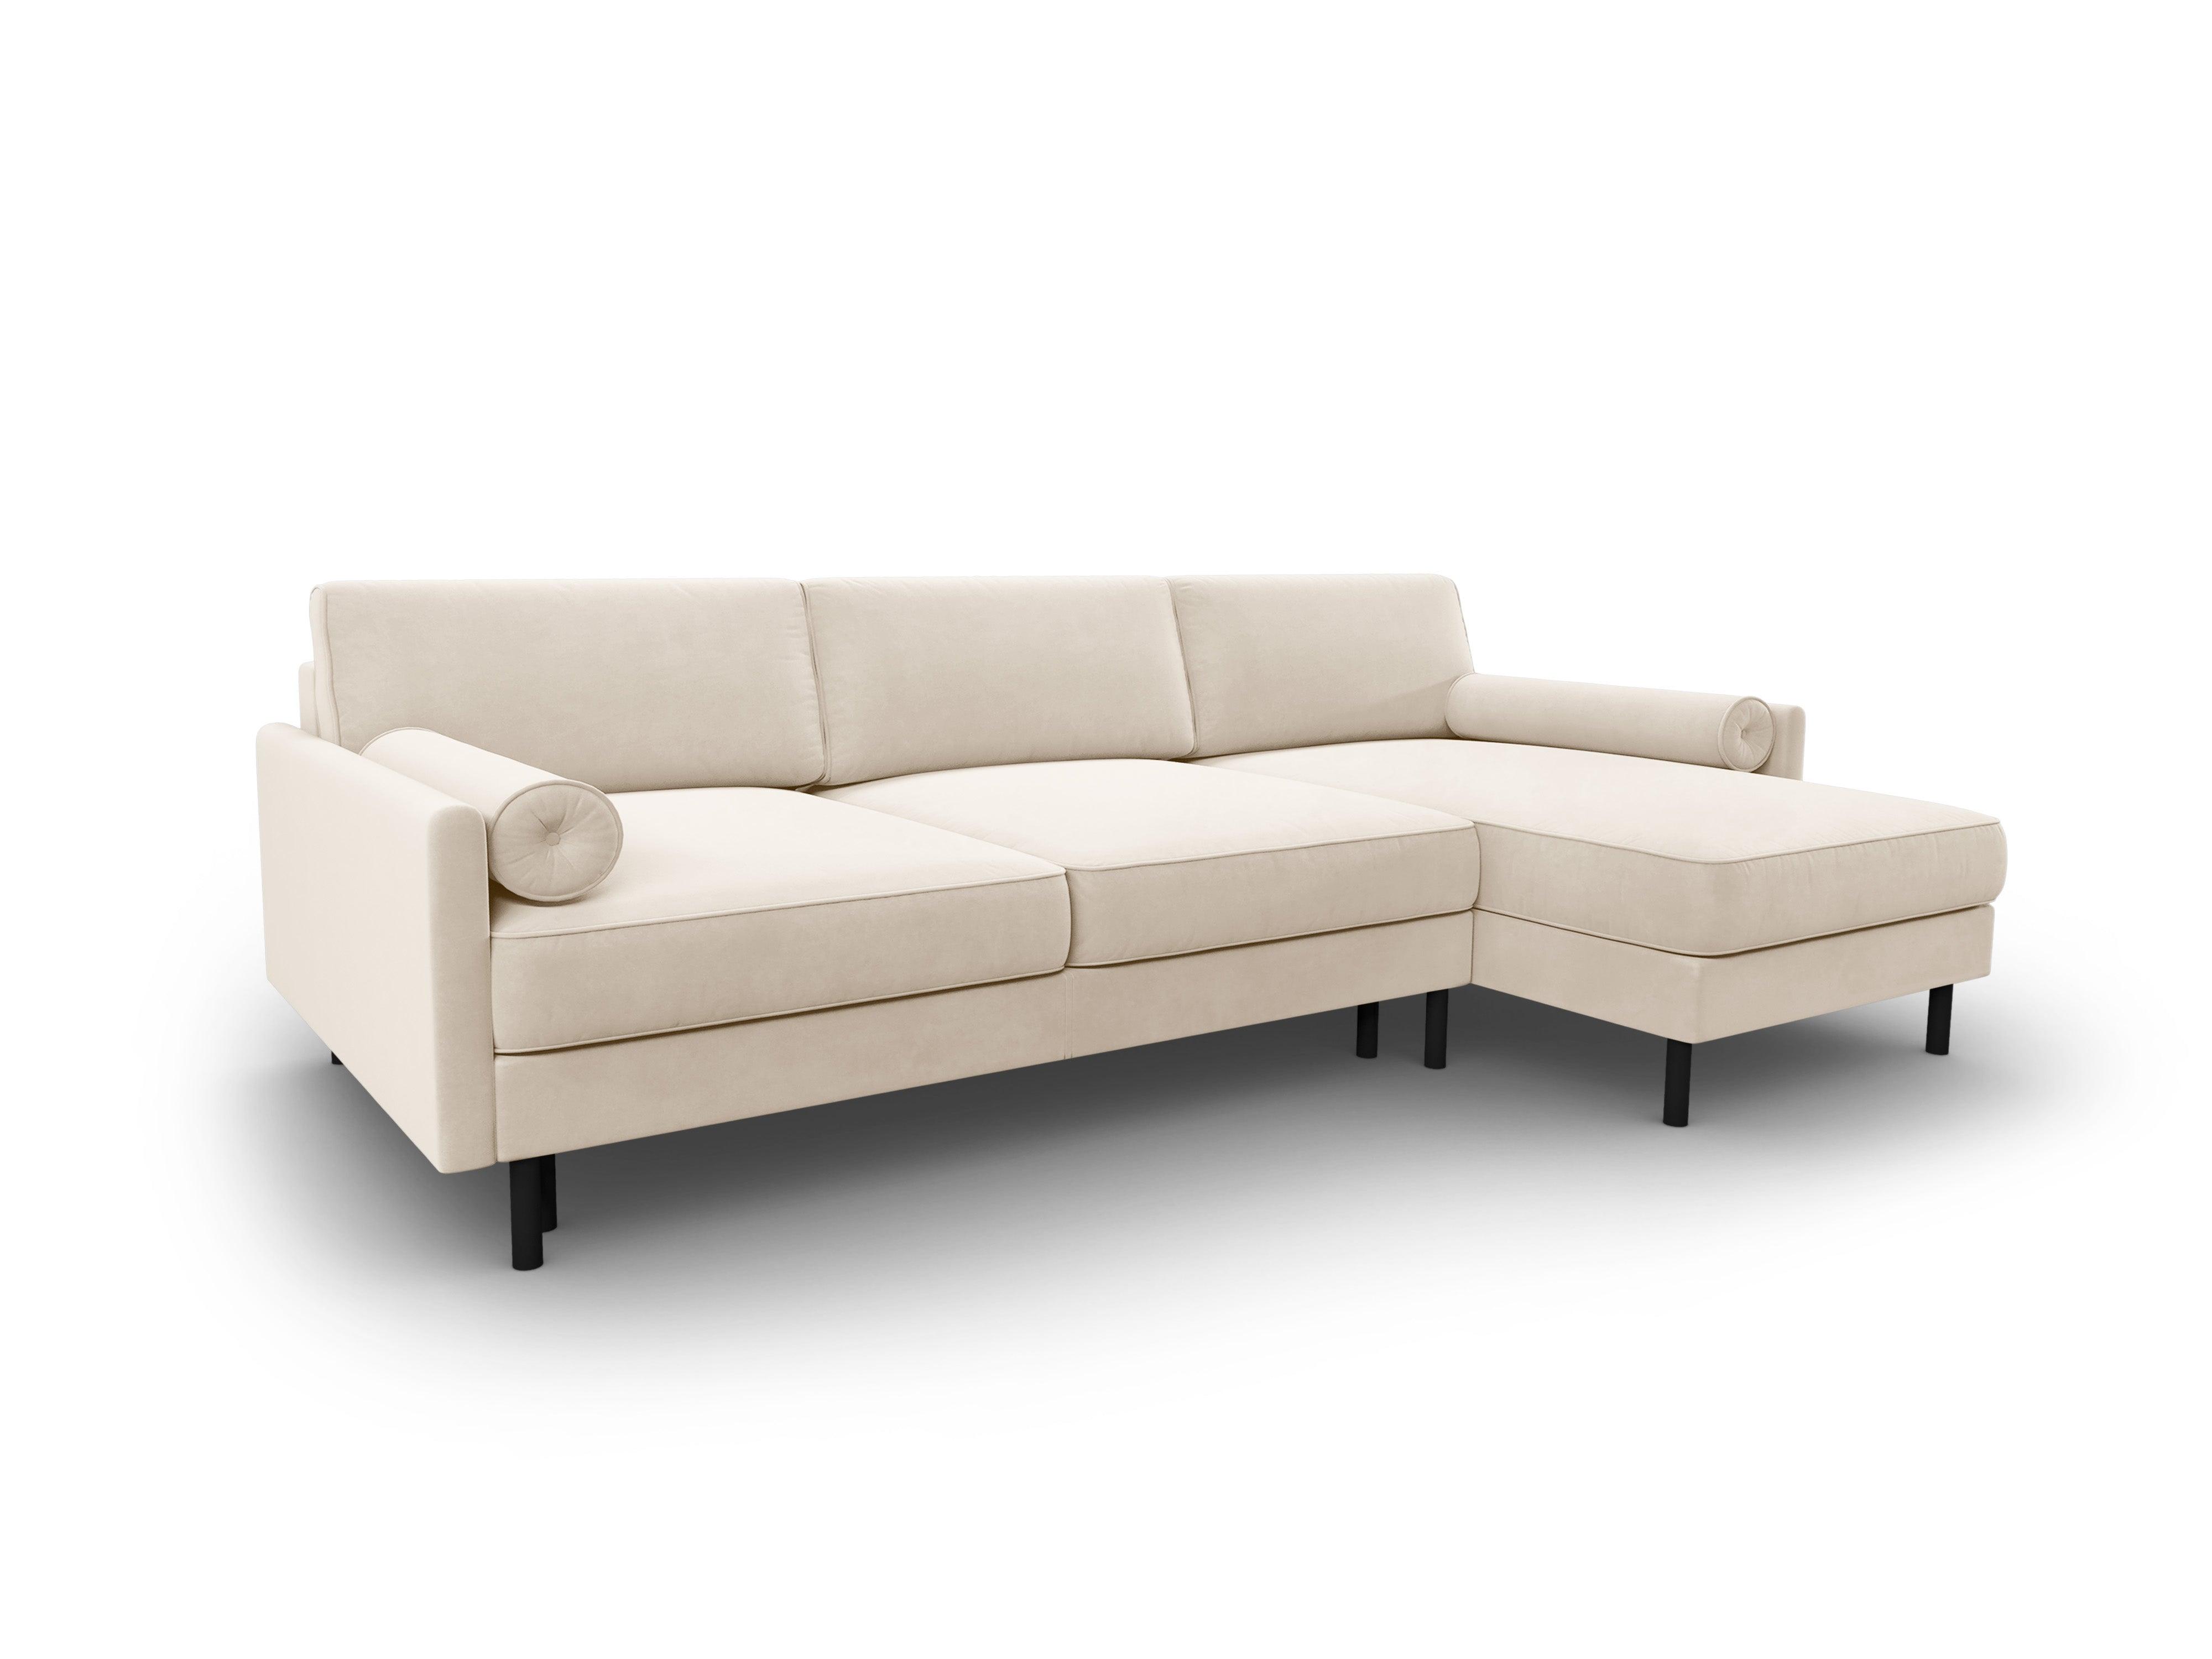 Velvet Right Corner Sofa With Bed Function And Box, "Scott", 5 Seats, 212x142x87
Made in Europe, Micadoni, Eye on Design